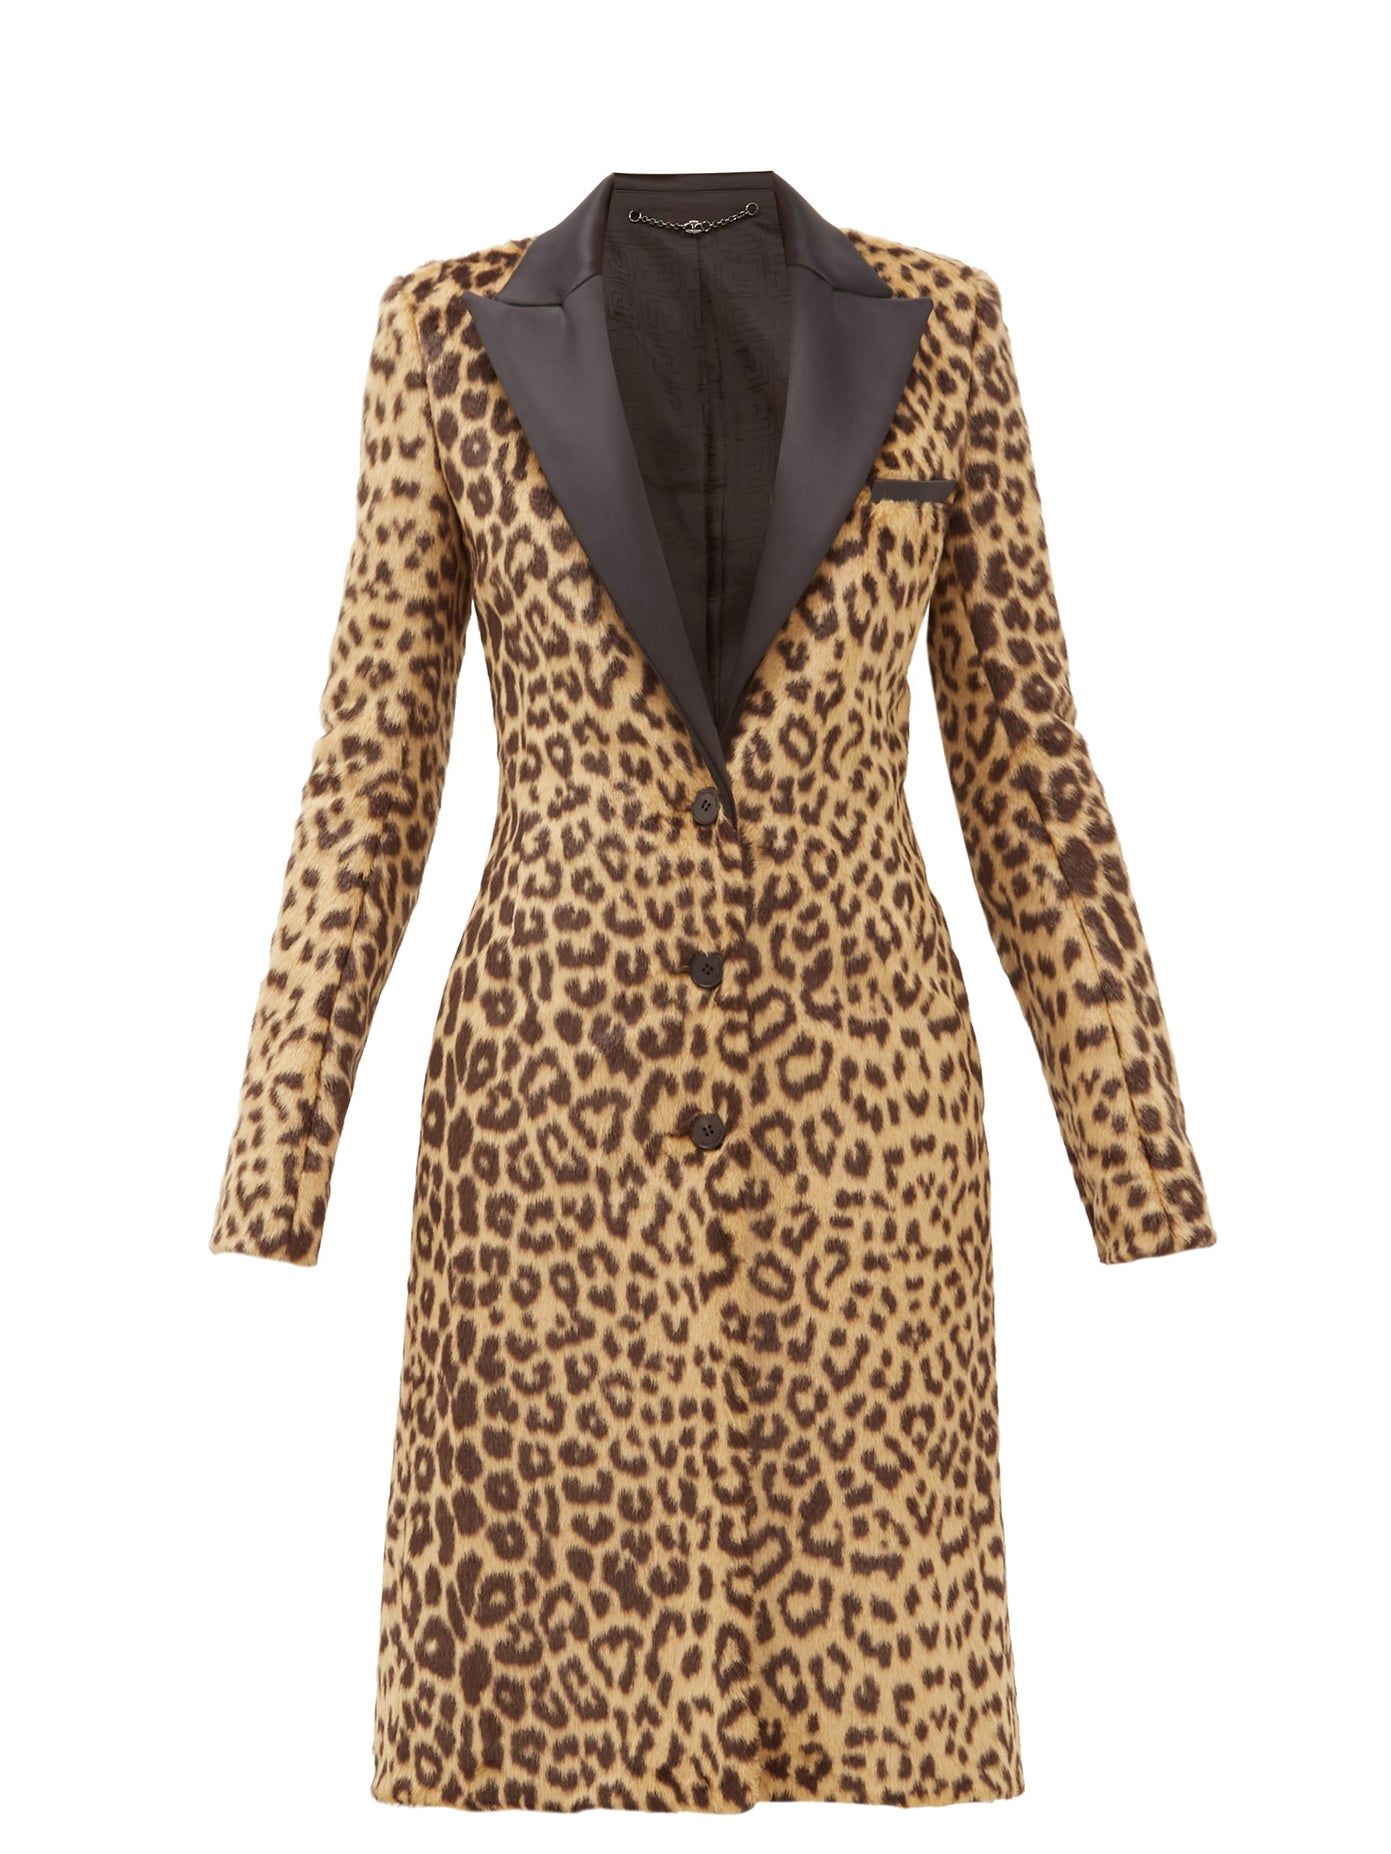 Styling Ideas for Leopard Printed Fur Coat Ensembles